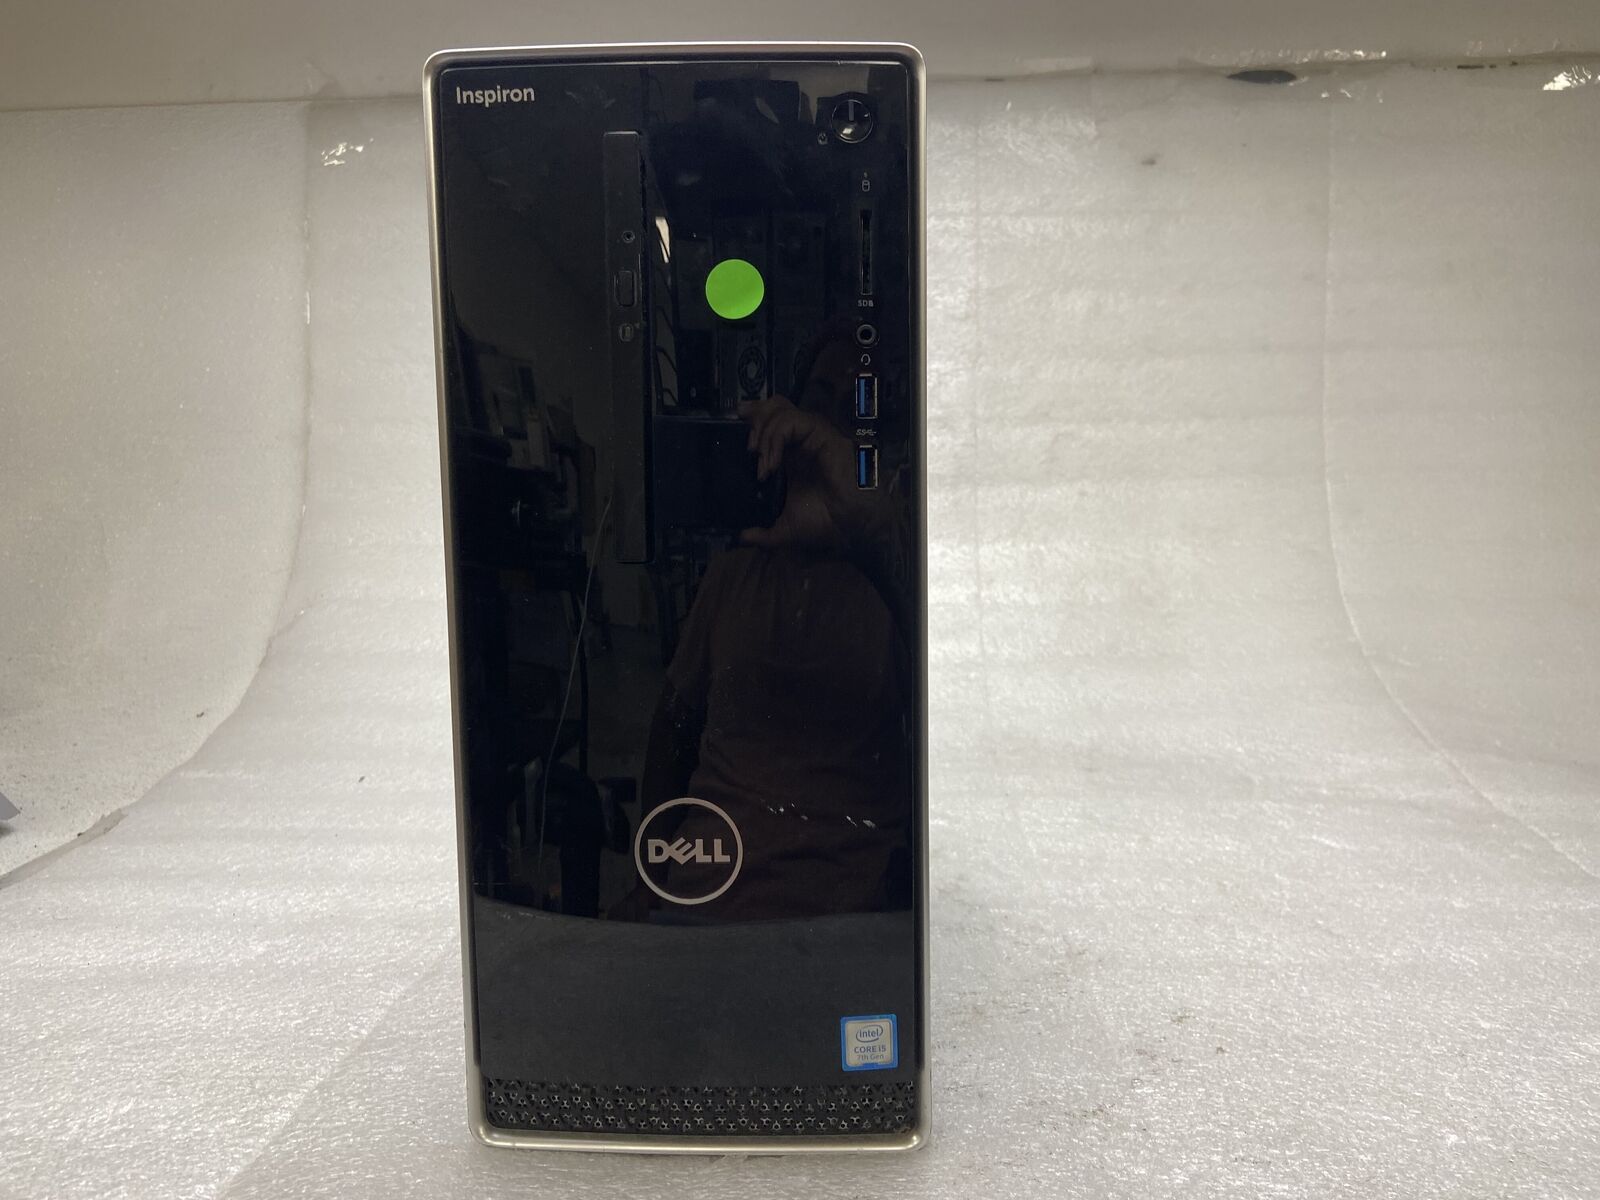 Dell Inspiron 3668 Desktop BOOTS Core i5-7400 3.00GHz 12GB RAM 1TB HDD NO OS